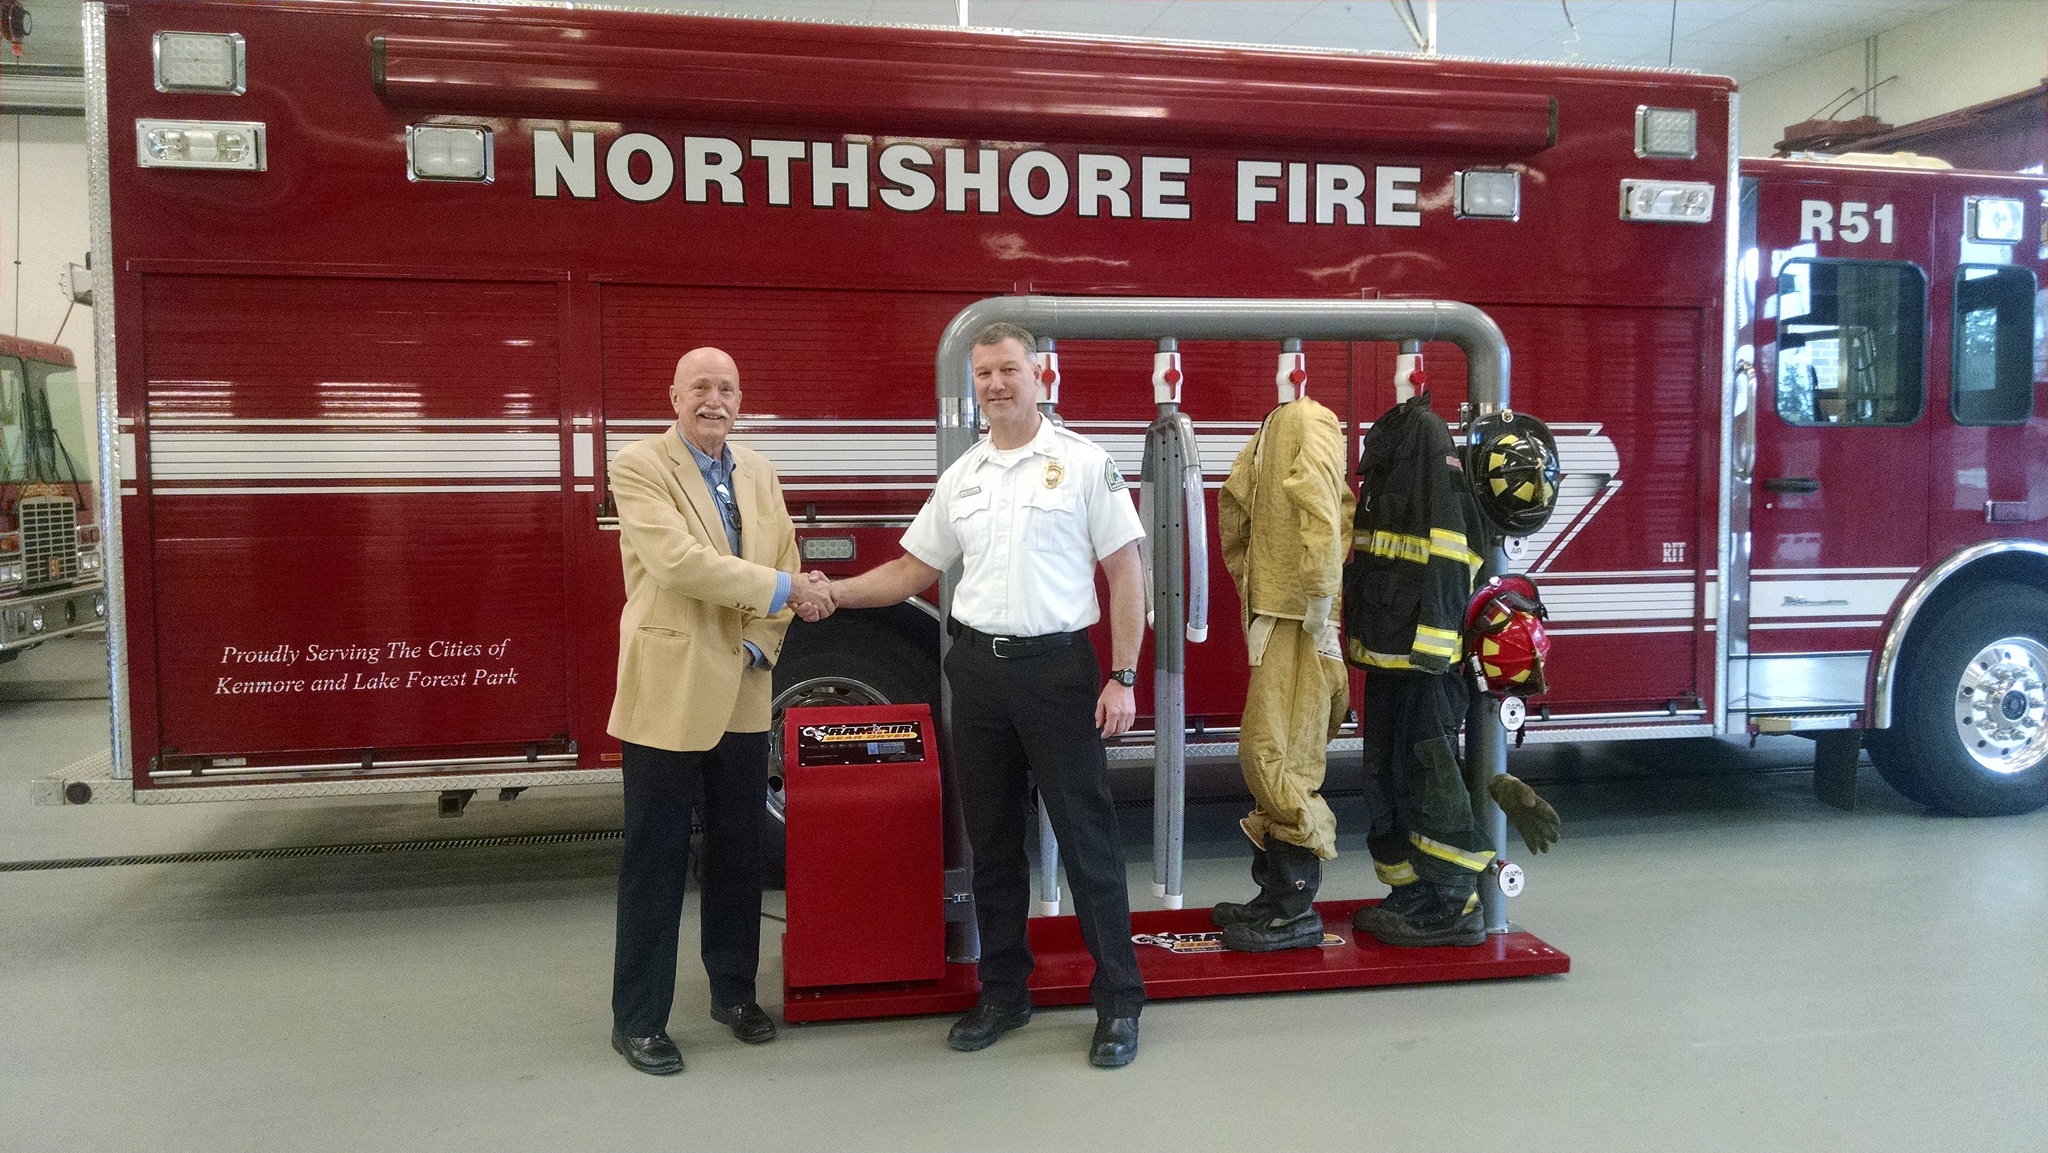 Ram Air Gear Dryer Director of Sales David Adams (left) presents a dryer, won in his company’s Hometown Heroes contest, to Northshore Fire Department Deputy Chief Eric Magnuson, who entered the contest on the department’s behalf. CATHERINE KRUMMEY / Kenmore Reporter